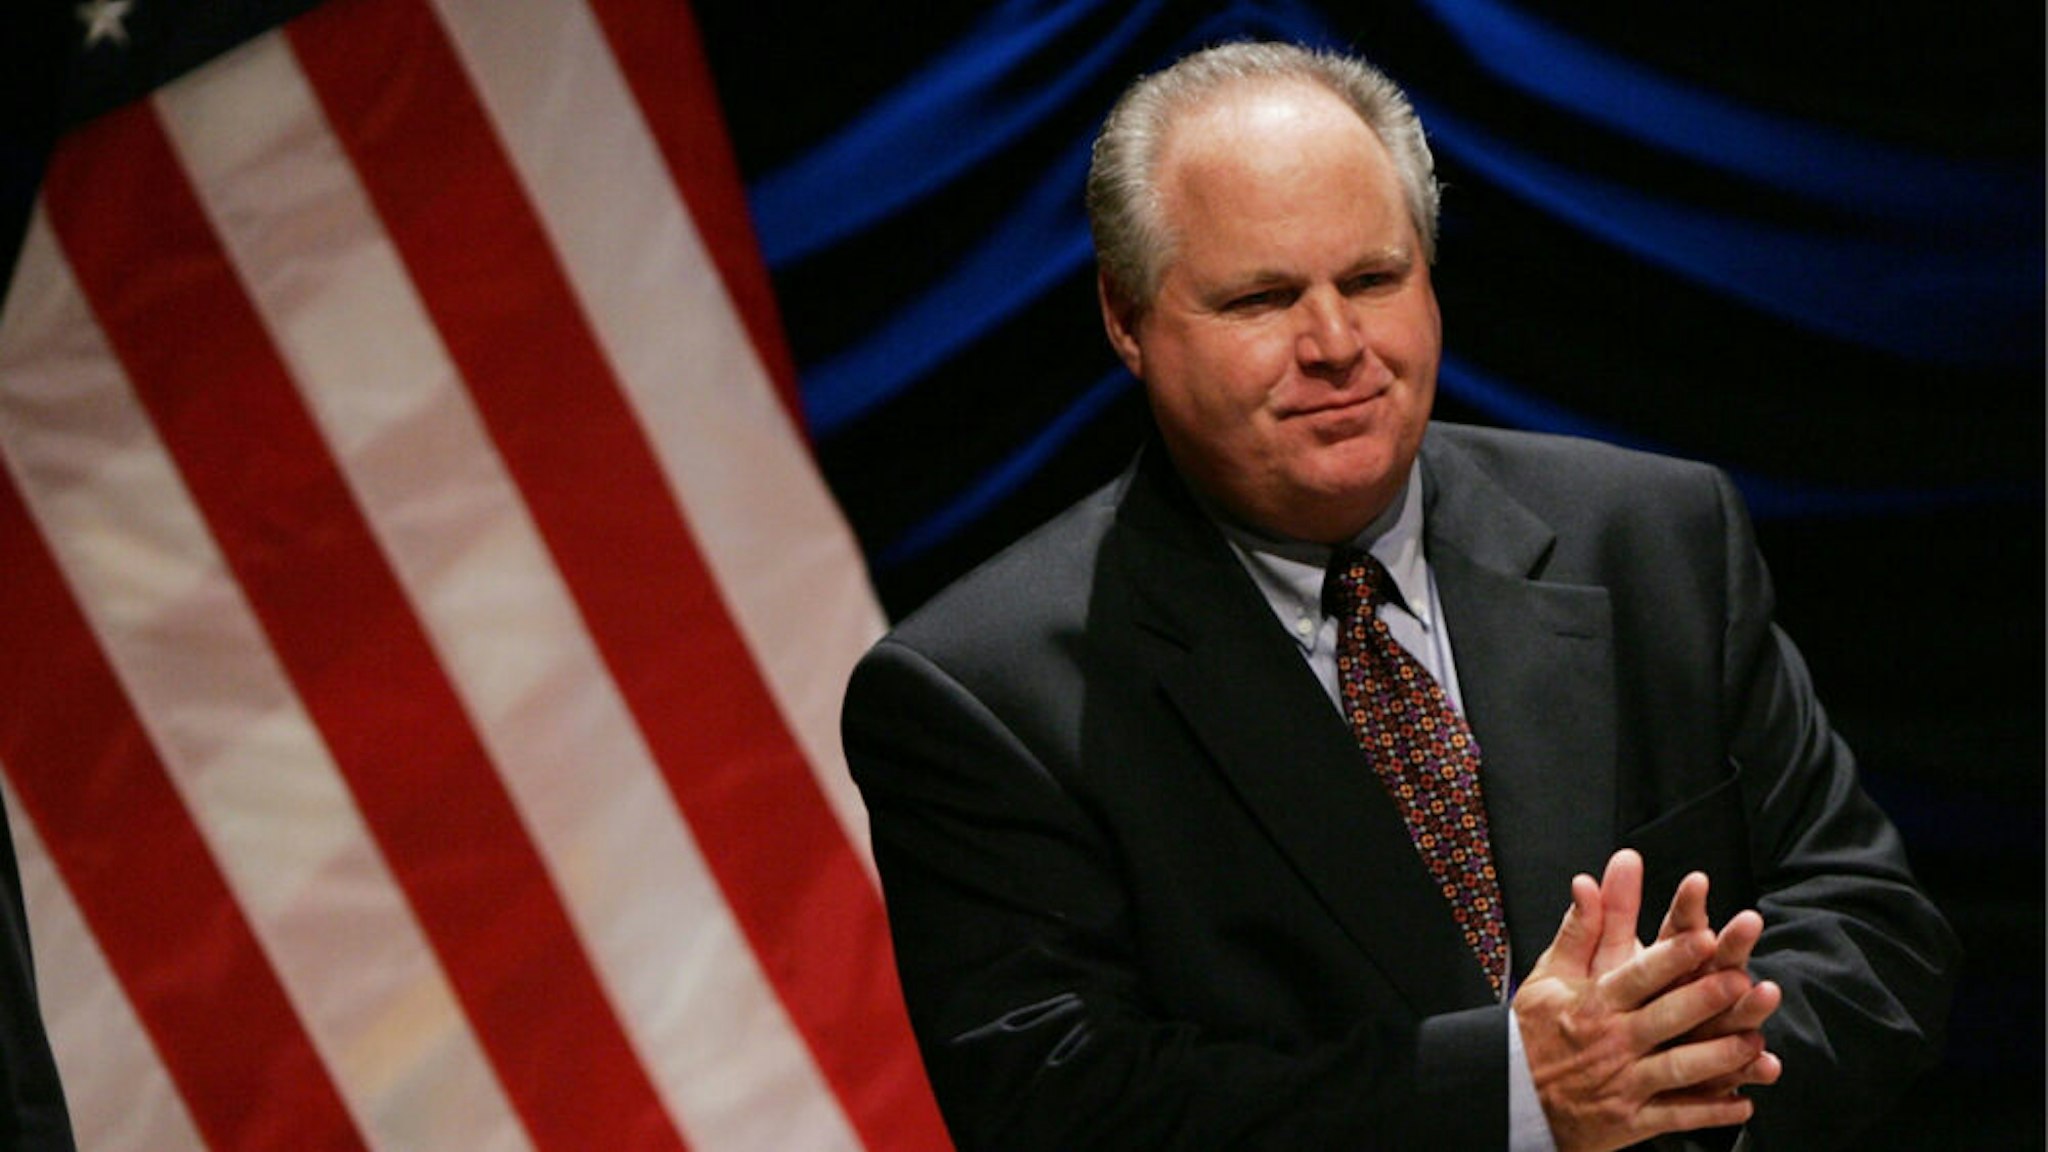 Radio personality Rush Limbaugh interacts with the audience before the start of a panel discussion "'24' and America's Image in Fighting Terrorism: Fact, Fiction, or Does It Matter?", June 23, 2006 in Washington, DC.